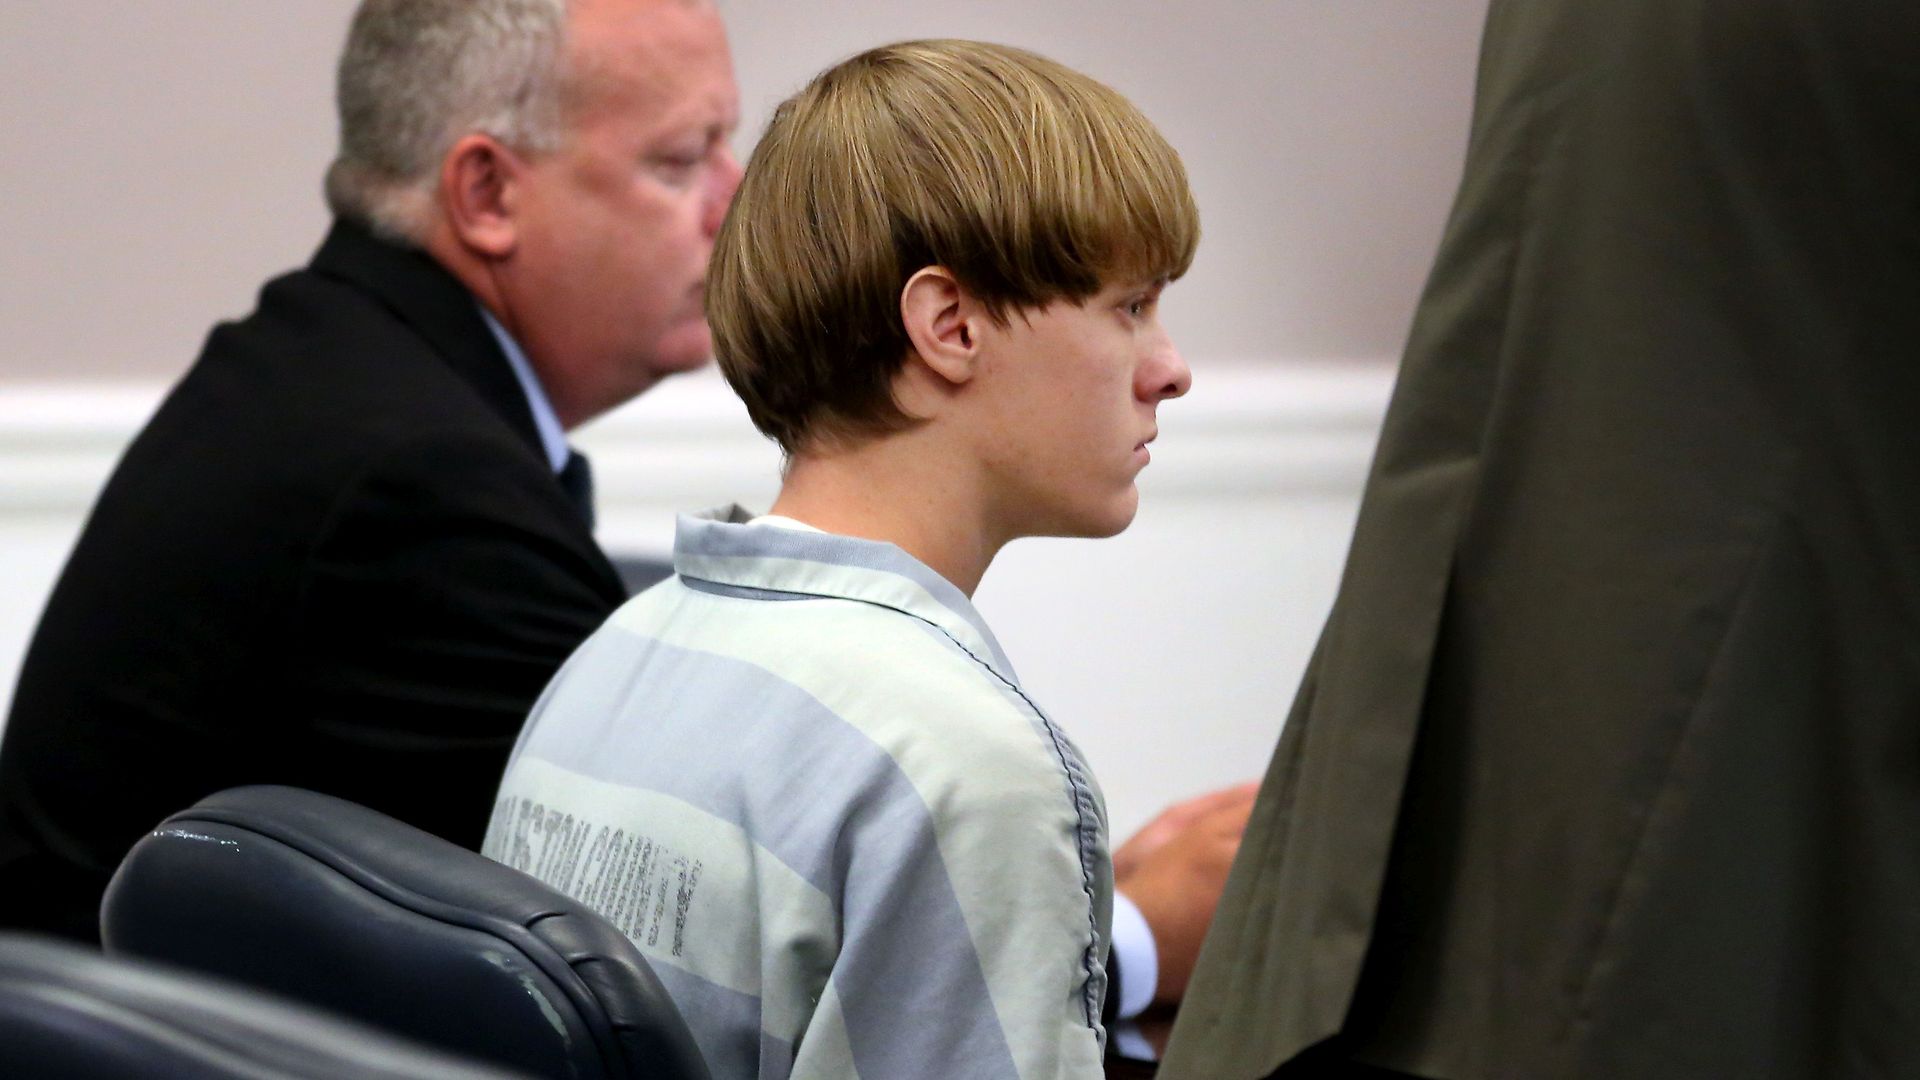 Dylan Roof appearing in court in July 2015 in Charleston, South Carolina.